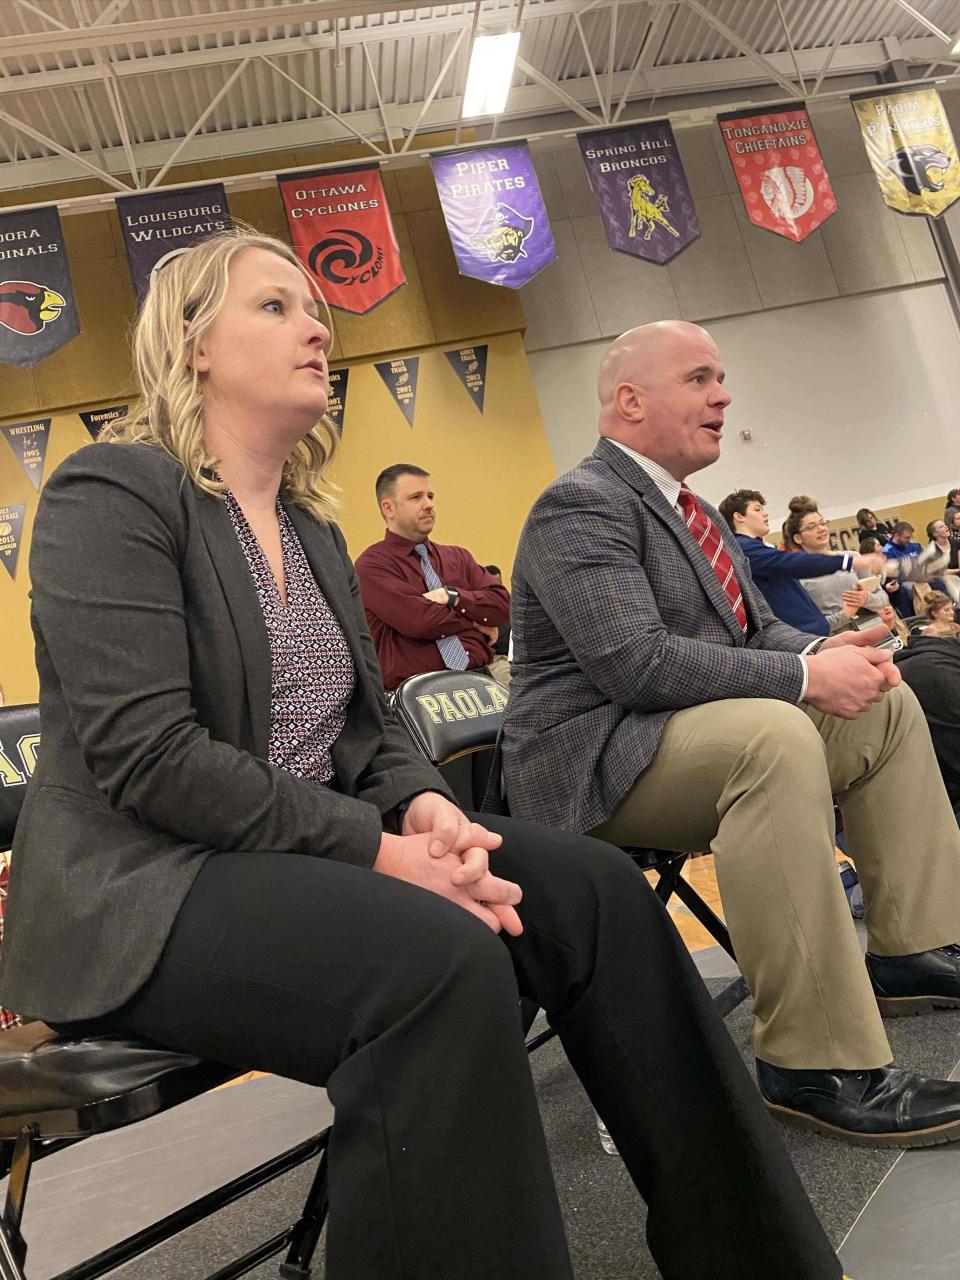 Working side by side as coaches for the Washburn Rural girls wrestling program, Damon and Lindsay Parker have led the team to two straight state championships. Though he resigned as the boys' wrestling coach, Damon will continue to coach the girls team.